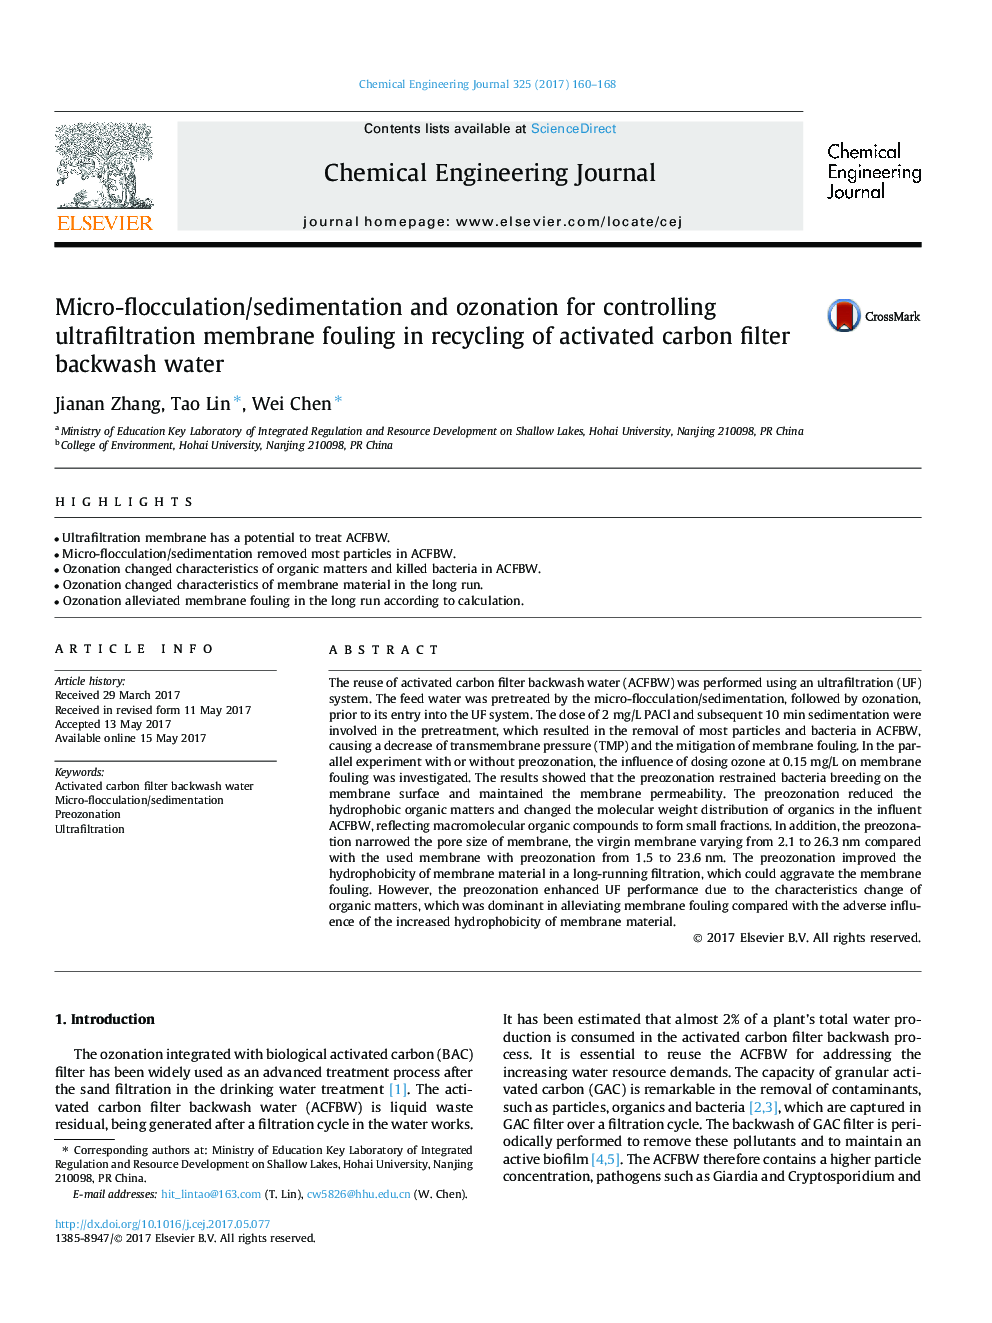 Micro-flocculation/sedimentation and ozonation for controlling ultrafiltration membrane fouling in recycling of activated carbon filter backwash water